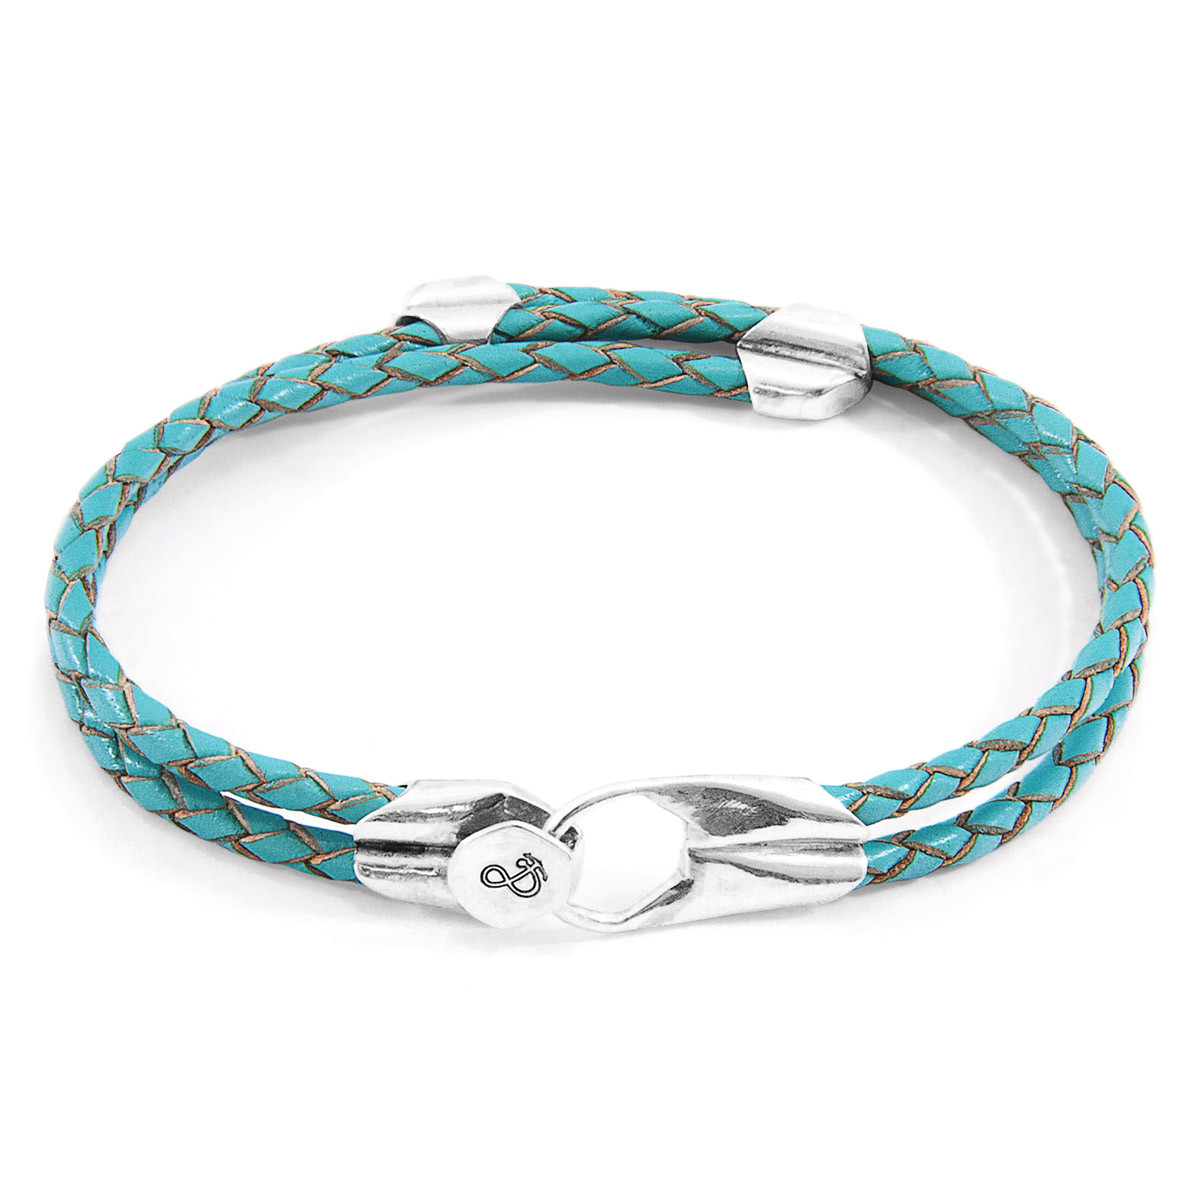 Turquoise Blue Conway Silver and Braided Leather Bracelet